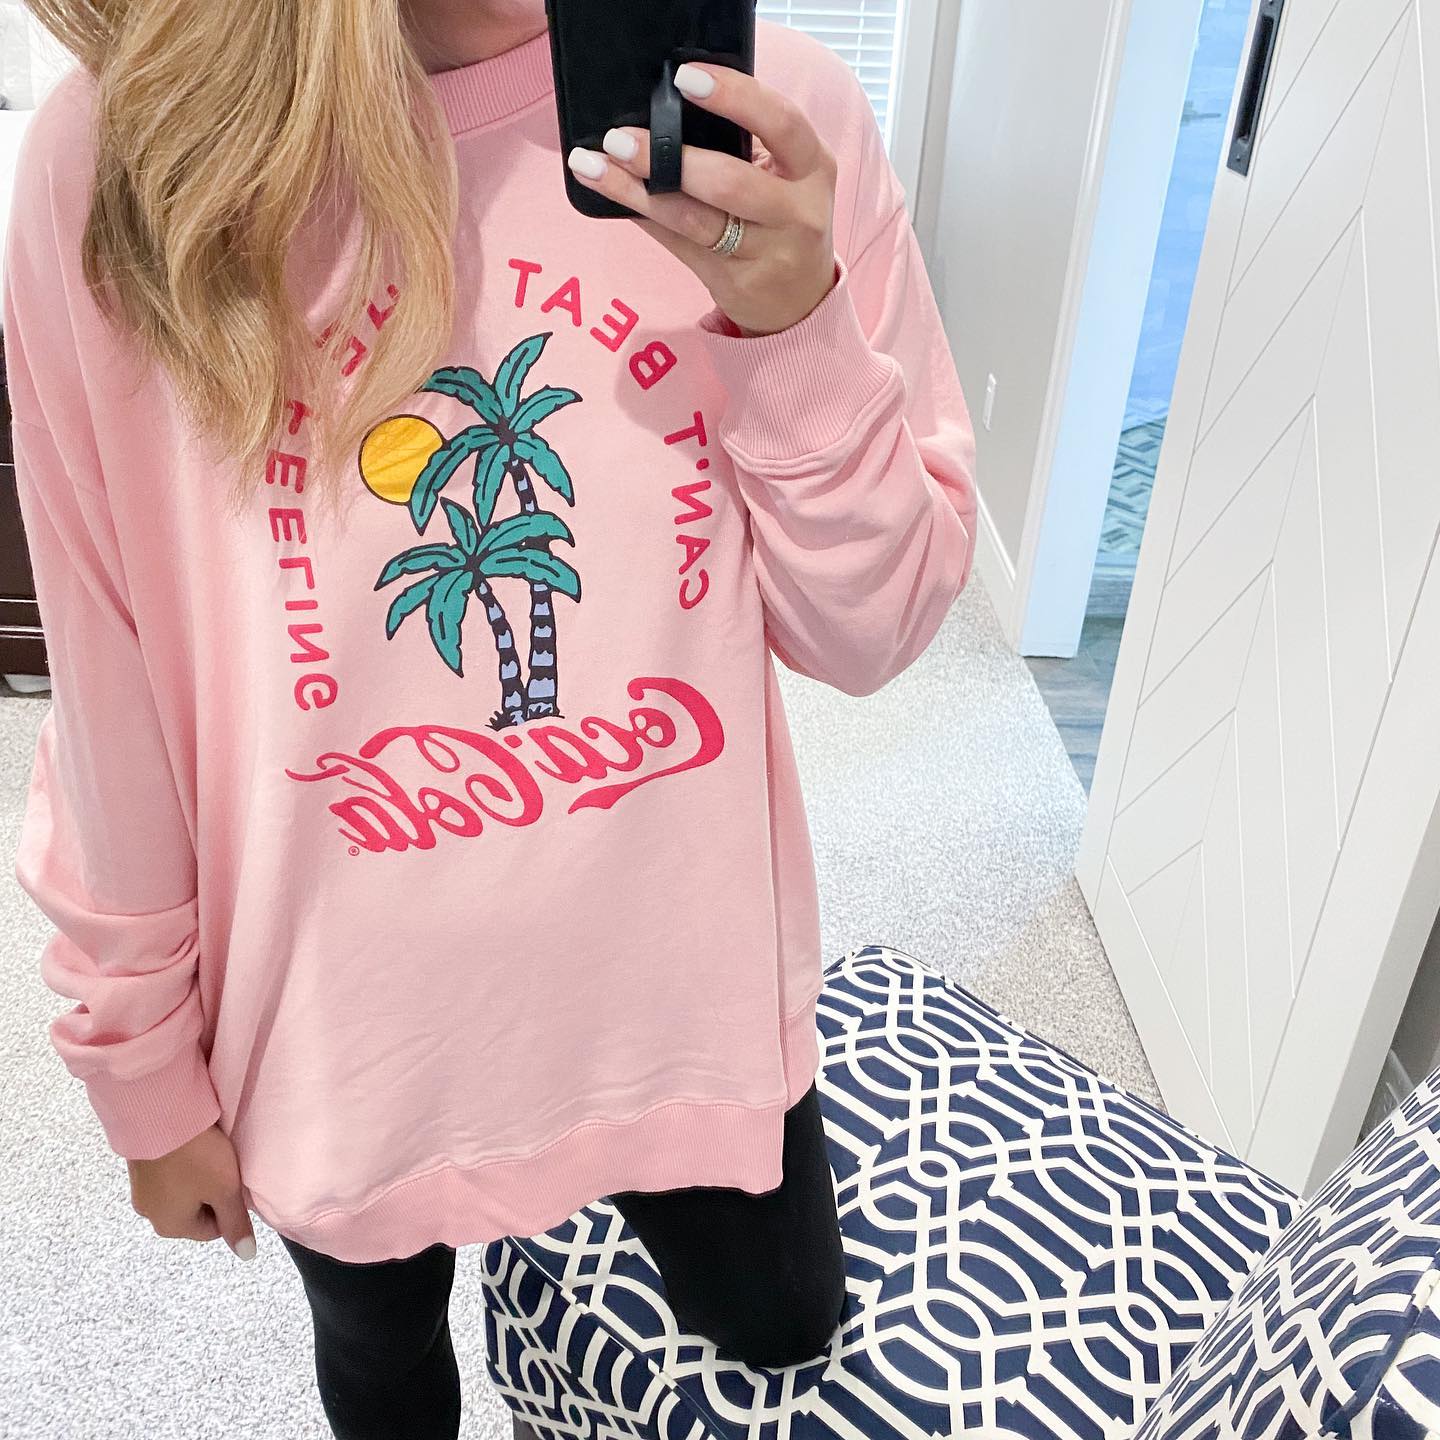 Can’t beat the feeling… of getting a MAJOR DEAL on this sweatshirt!! Normally $128, on sale for $29.99 🤍🌴Tap the link in my stories or shop via @shop.ltk #ltkunder50 #ltksalealert #ltkstyletip #cocacola